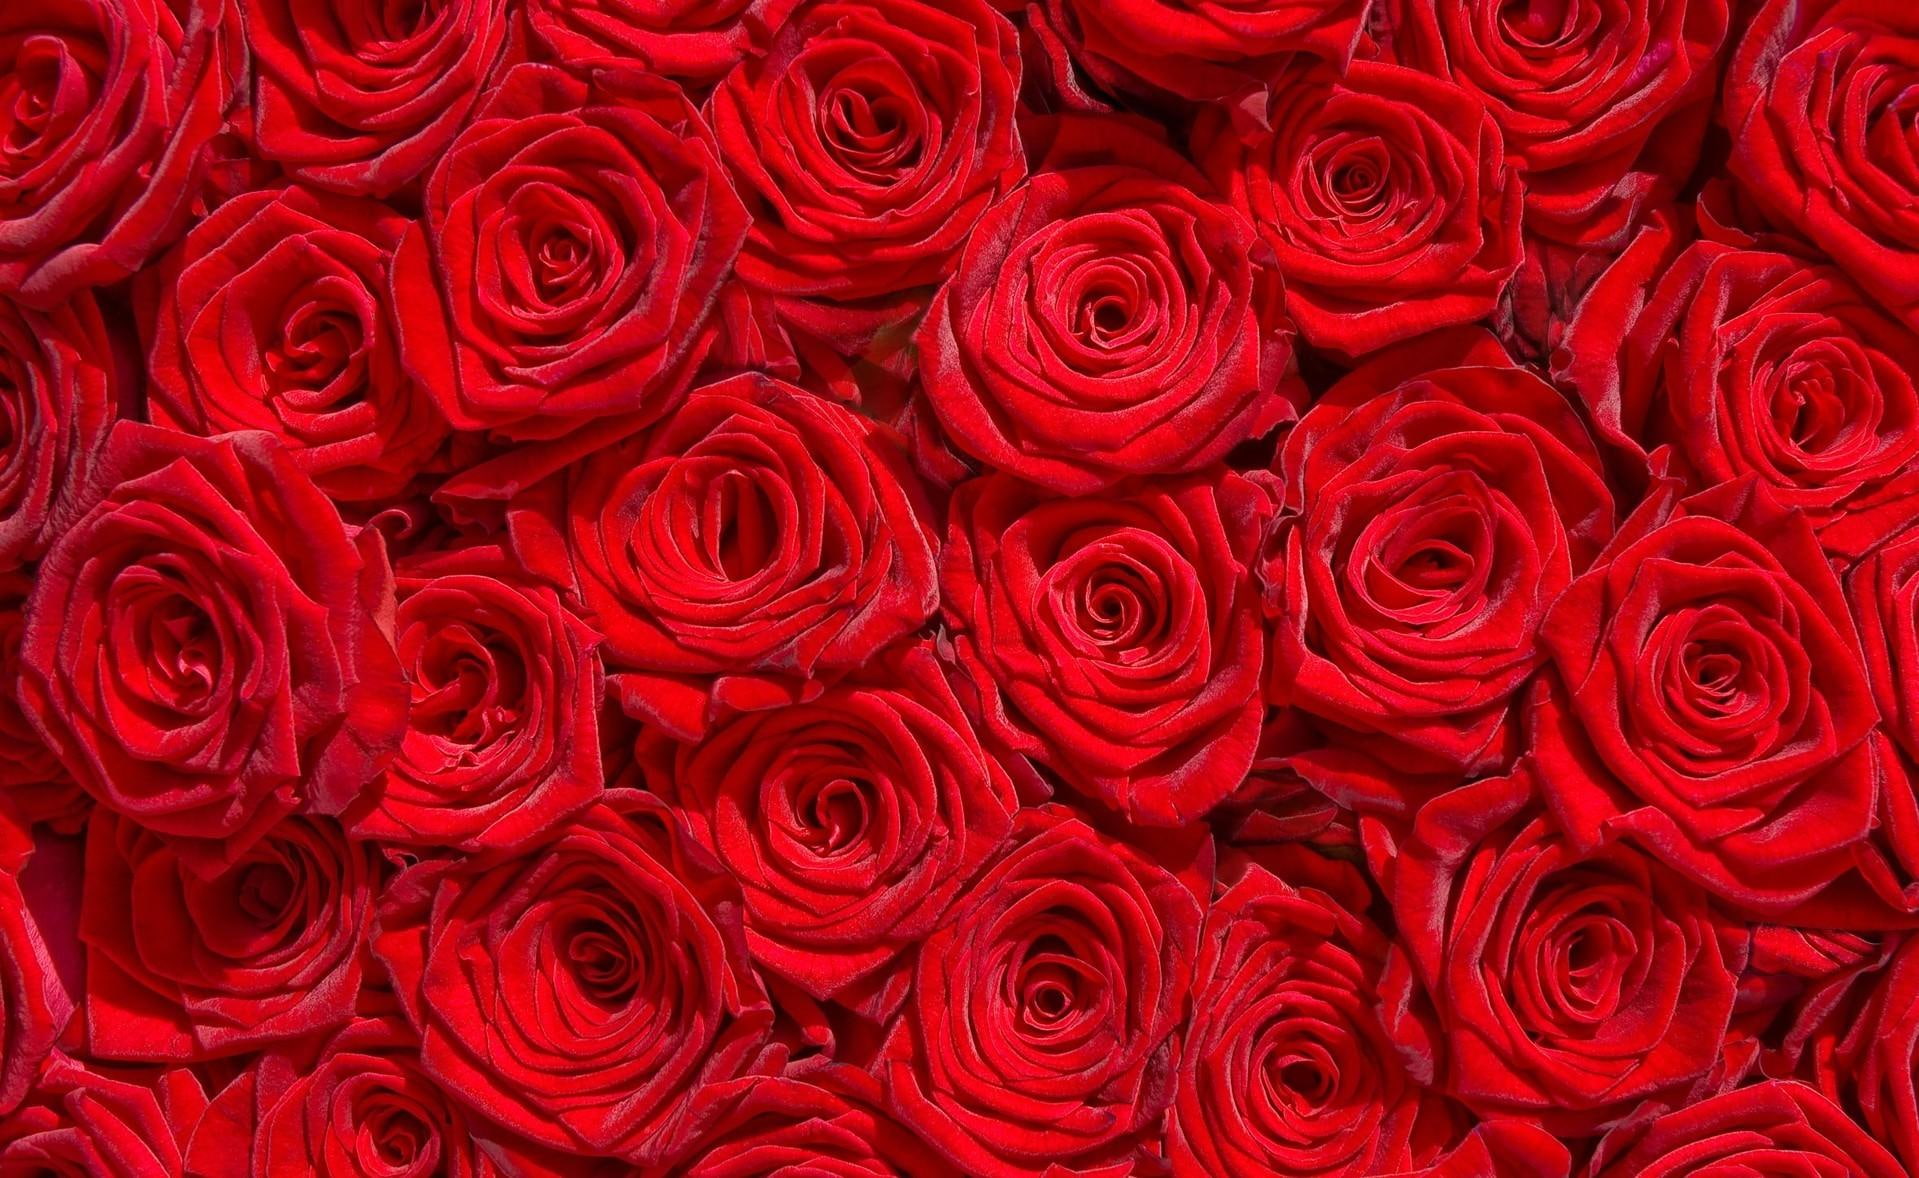 * Million roses *, bed red roses, petals, bouquet, wonderful